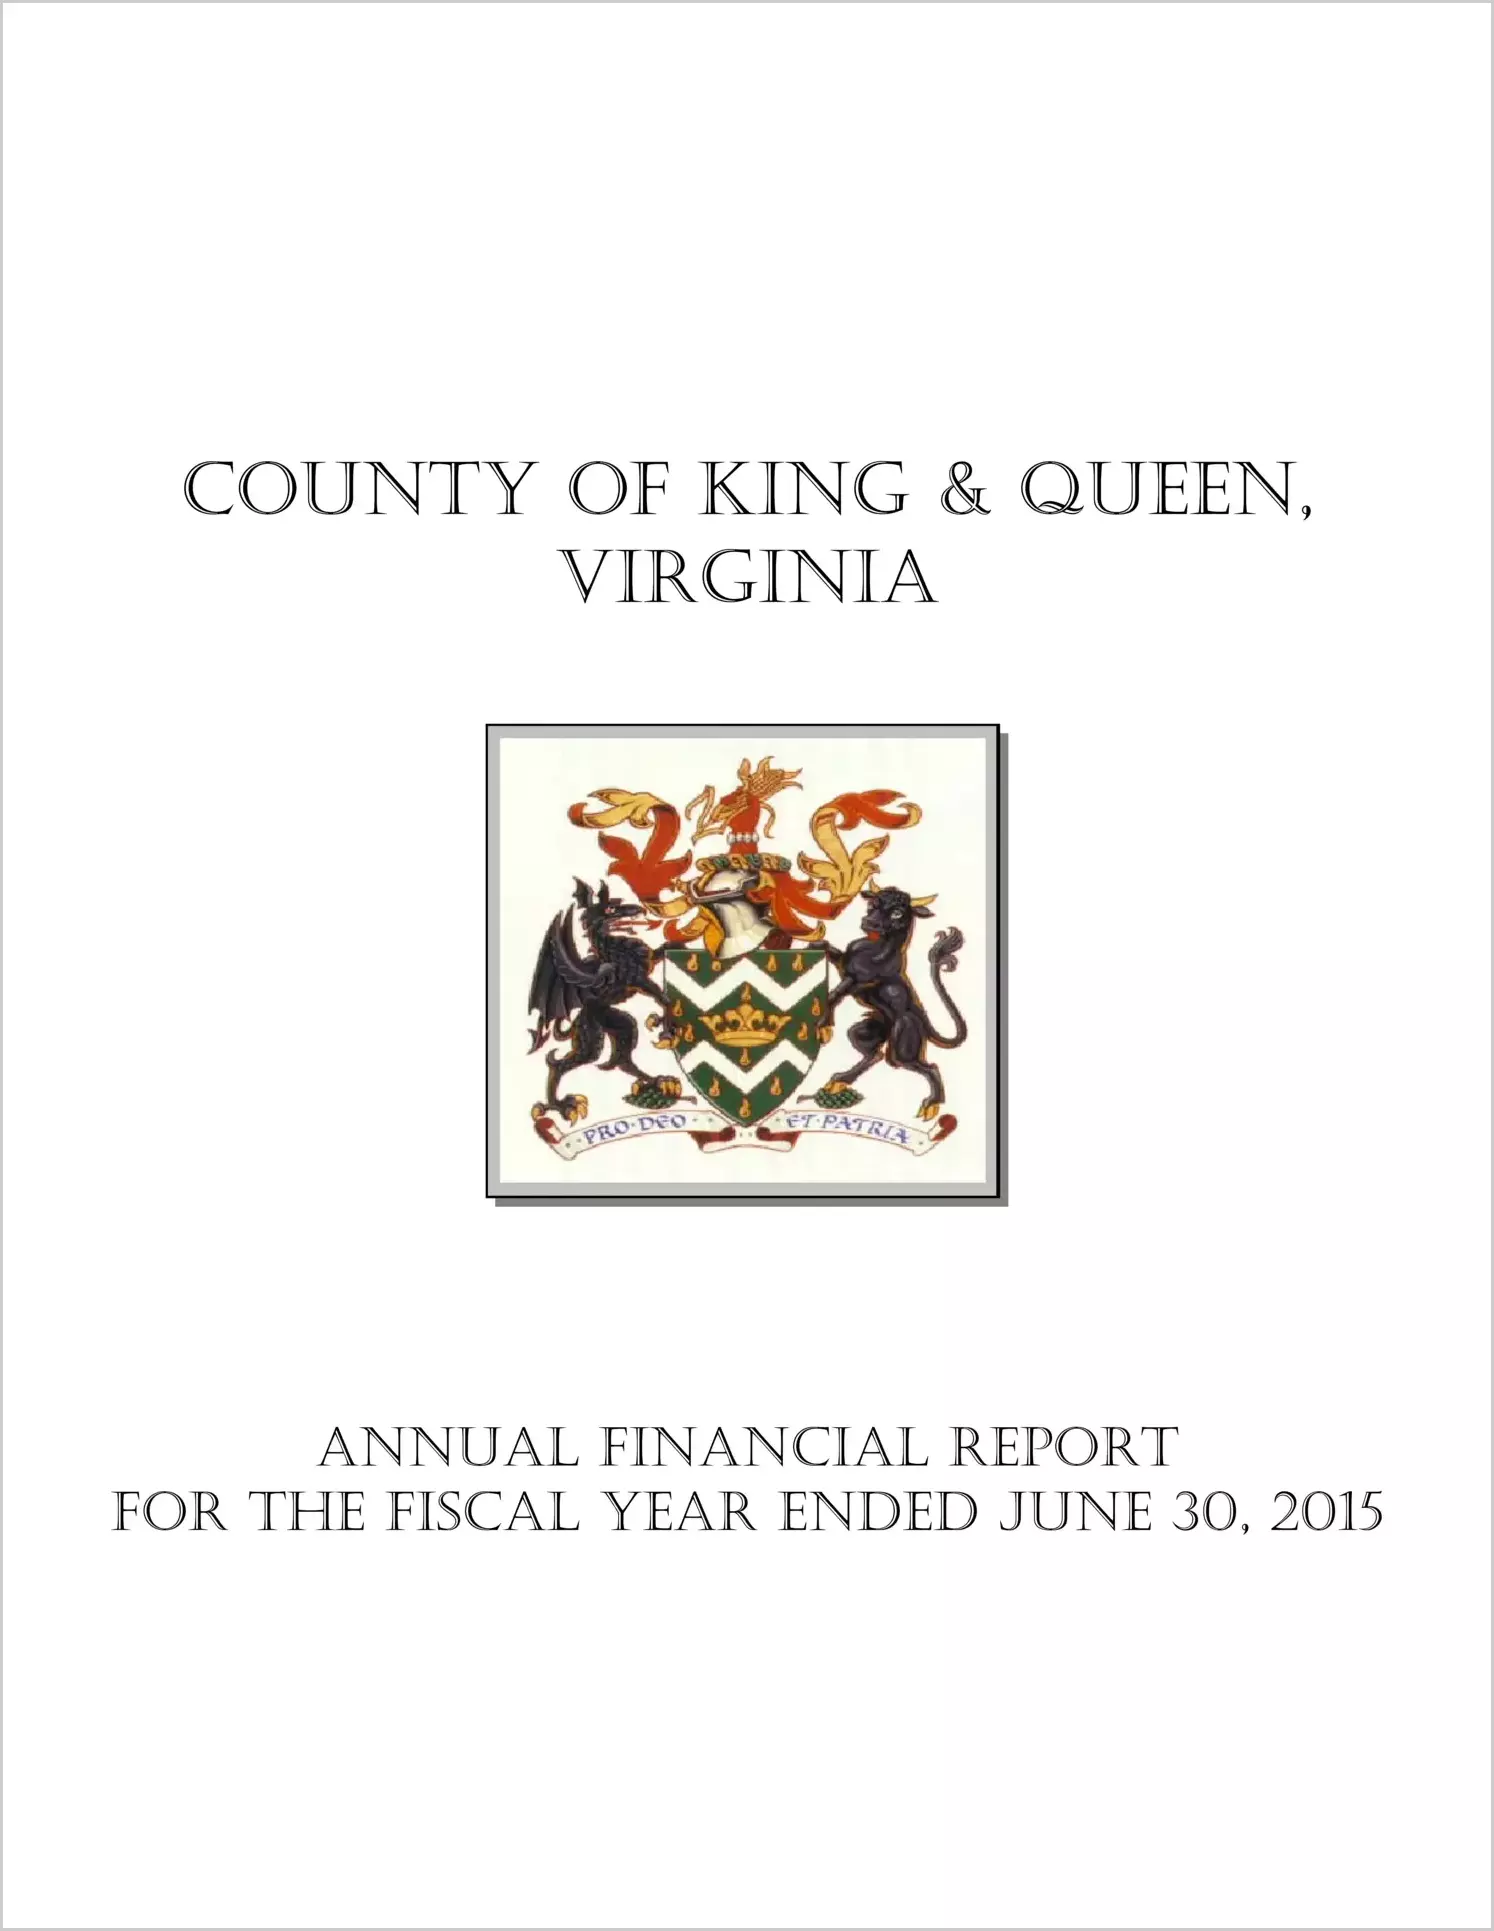 2015 Annual Financial Report for County of King and Queen